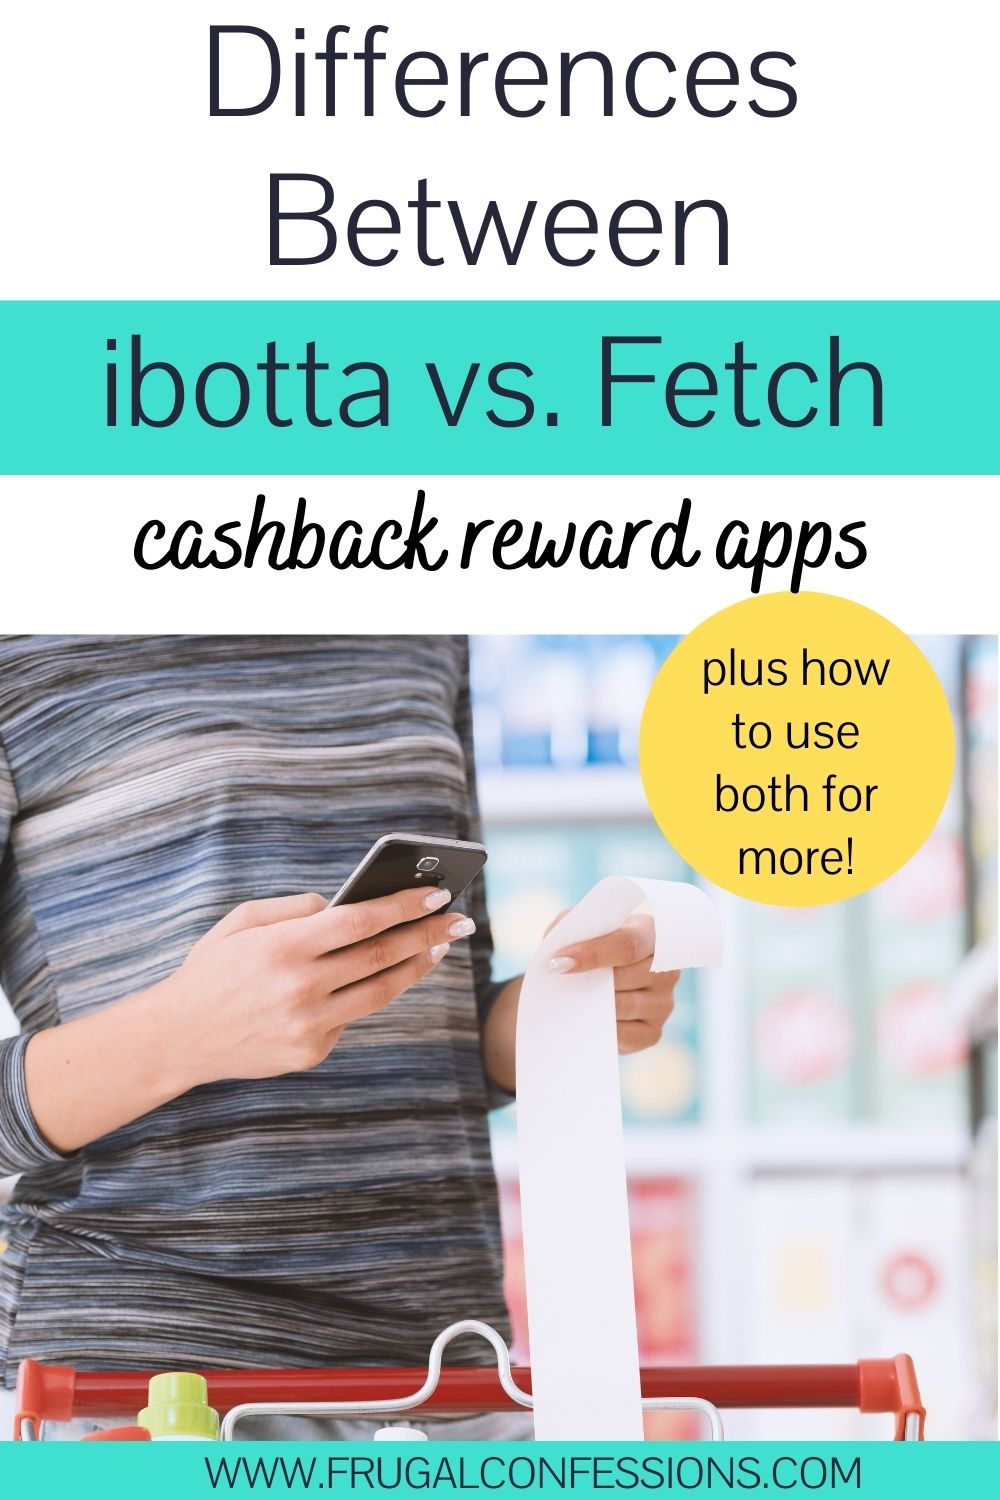 woman scanning grocery receipt through fetch and ibotta app, text overlay "differences between ibotta and fetch cashback reward apps"